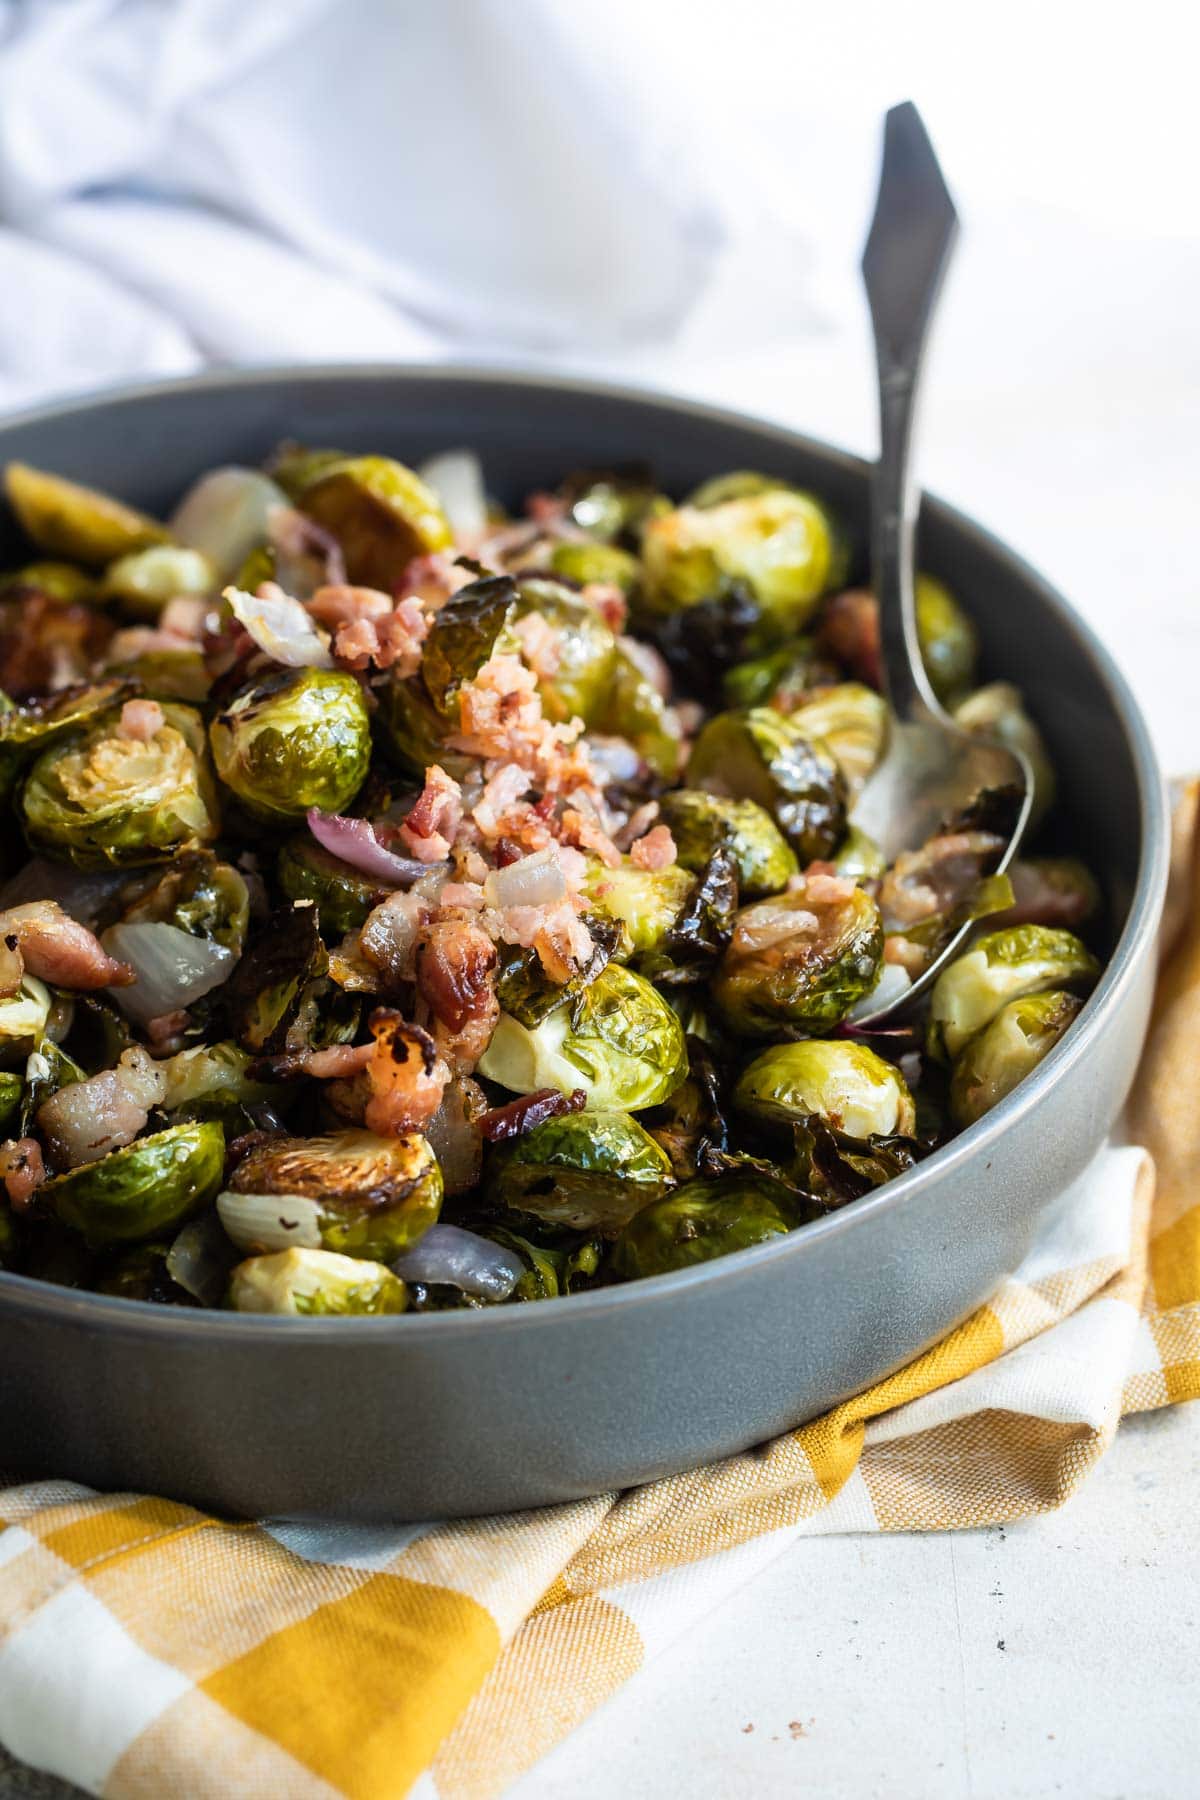 Roasted brussels sprouts being scooped out of a metal pan.